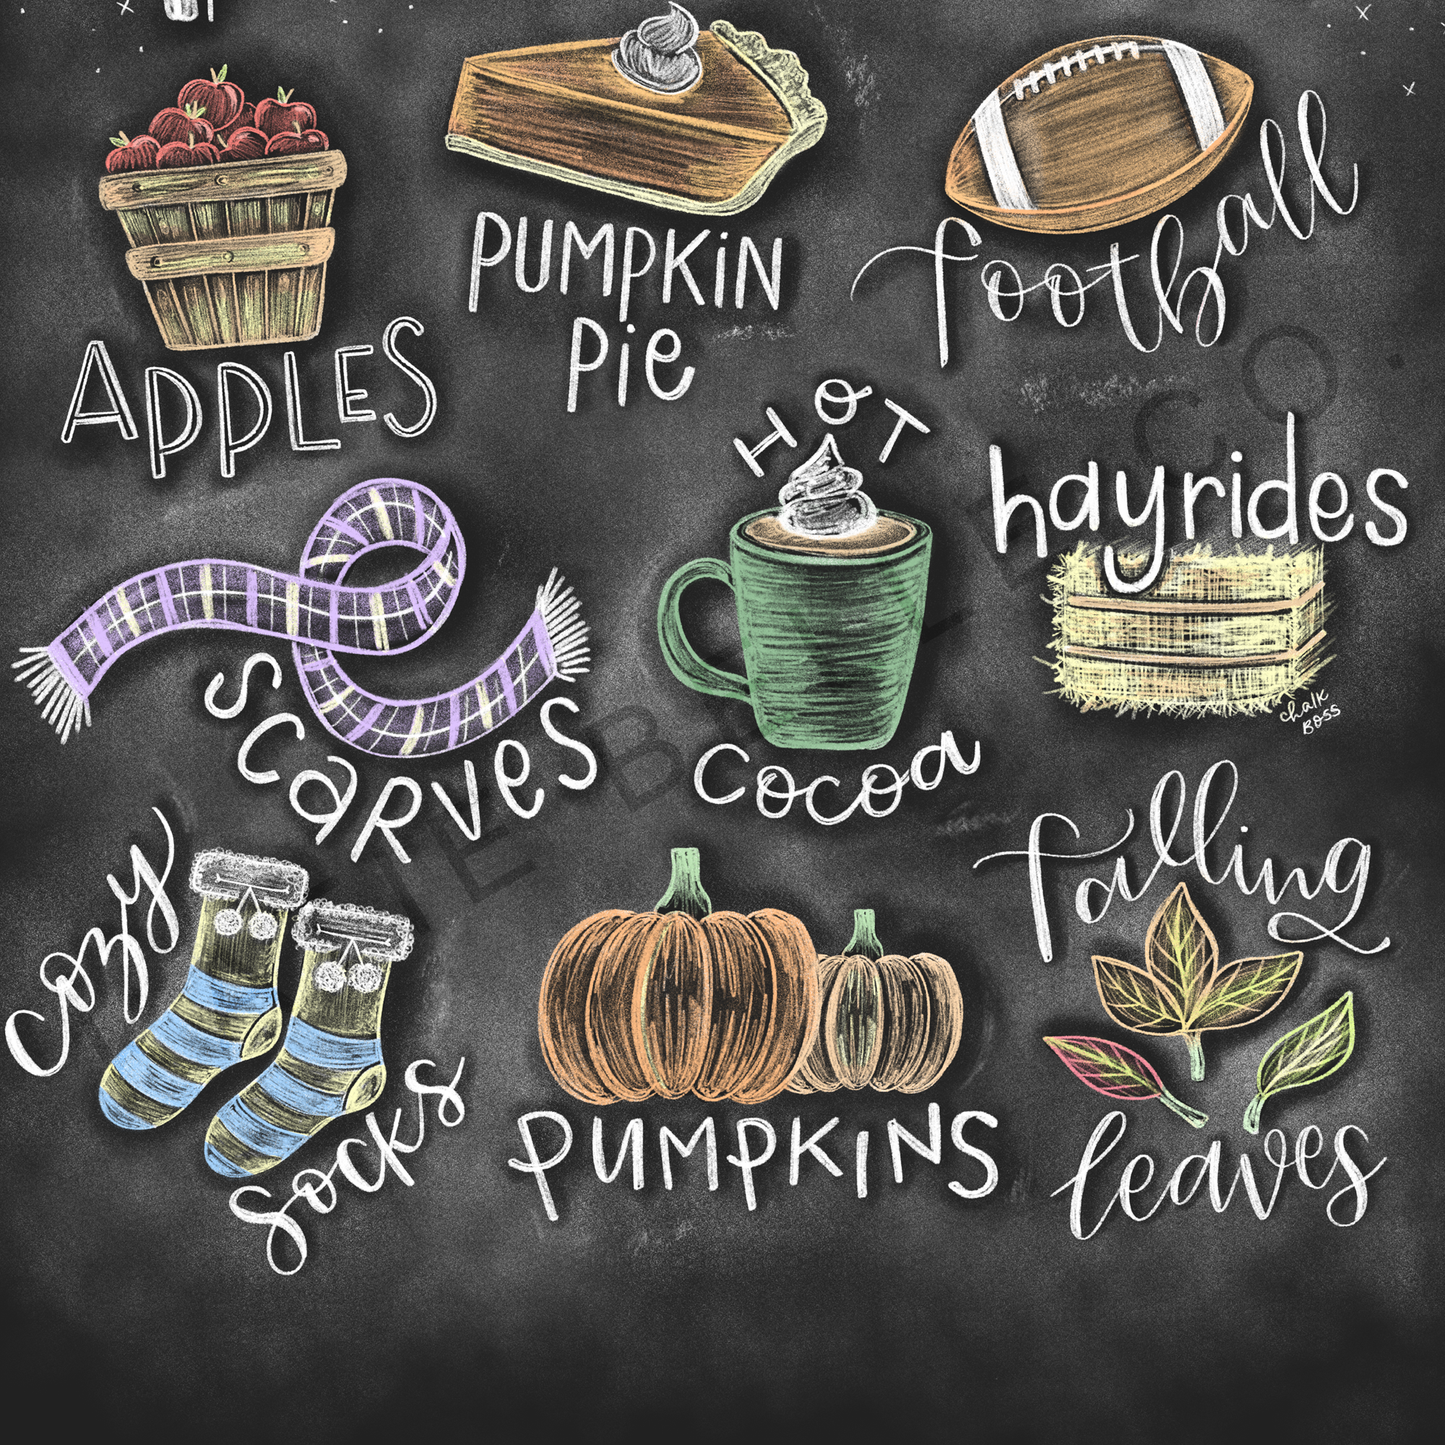 Fall favorites chalkboard print. Fall favorites hand lettered tittle. Fall doodles including apple, pumpkin pie, football, scarves, hot cocoa. hayrides, cozy socks, pumpkins, falling leaves. Fall decor. Chalk Art. Frame not included. Hand drawn by Katie Belle Co.  Fall colors. Autumn decor. Fall decor